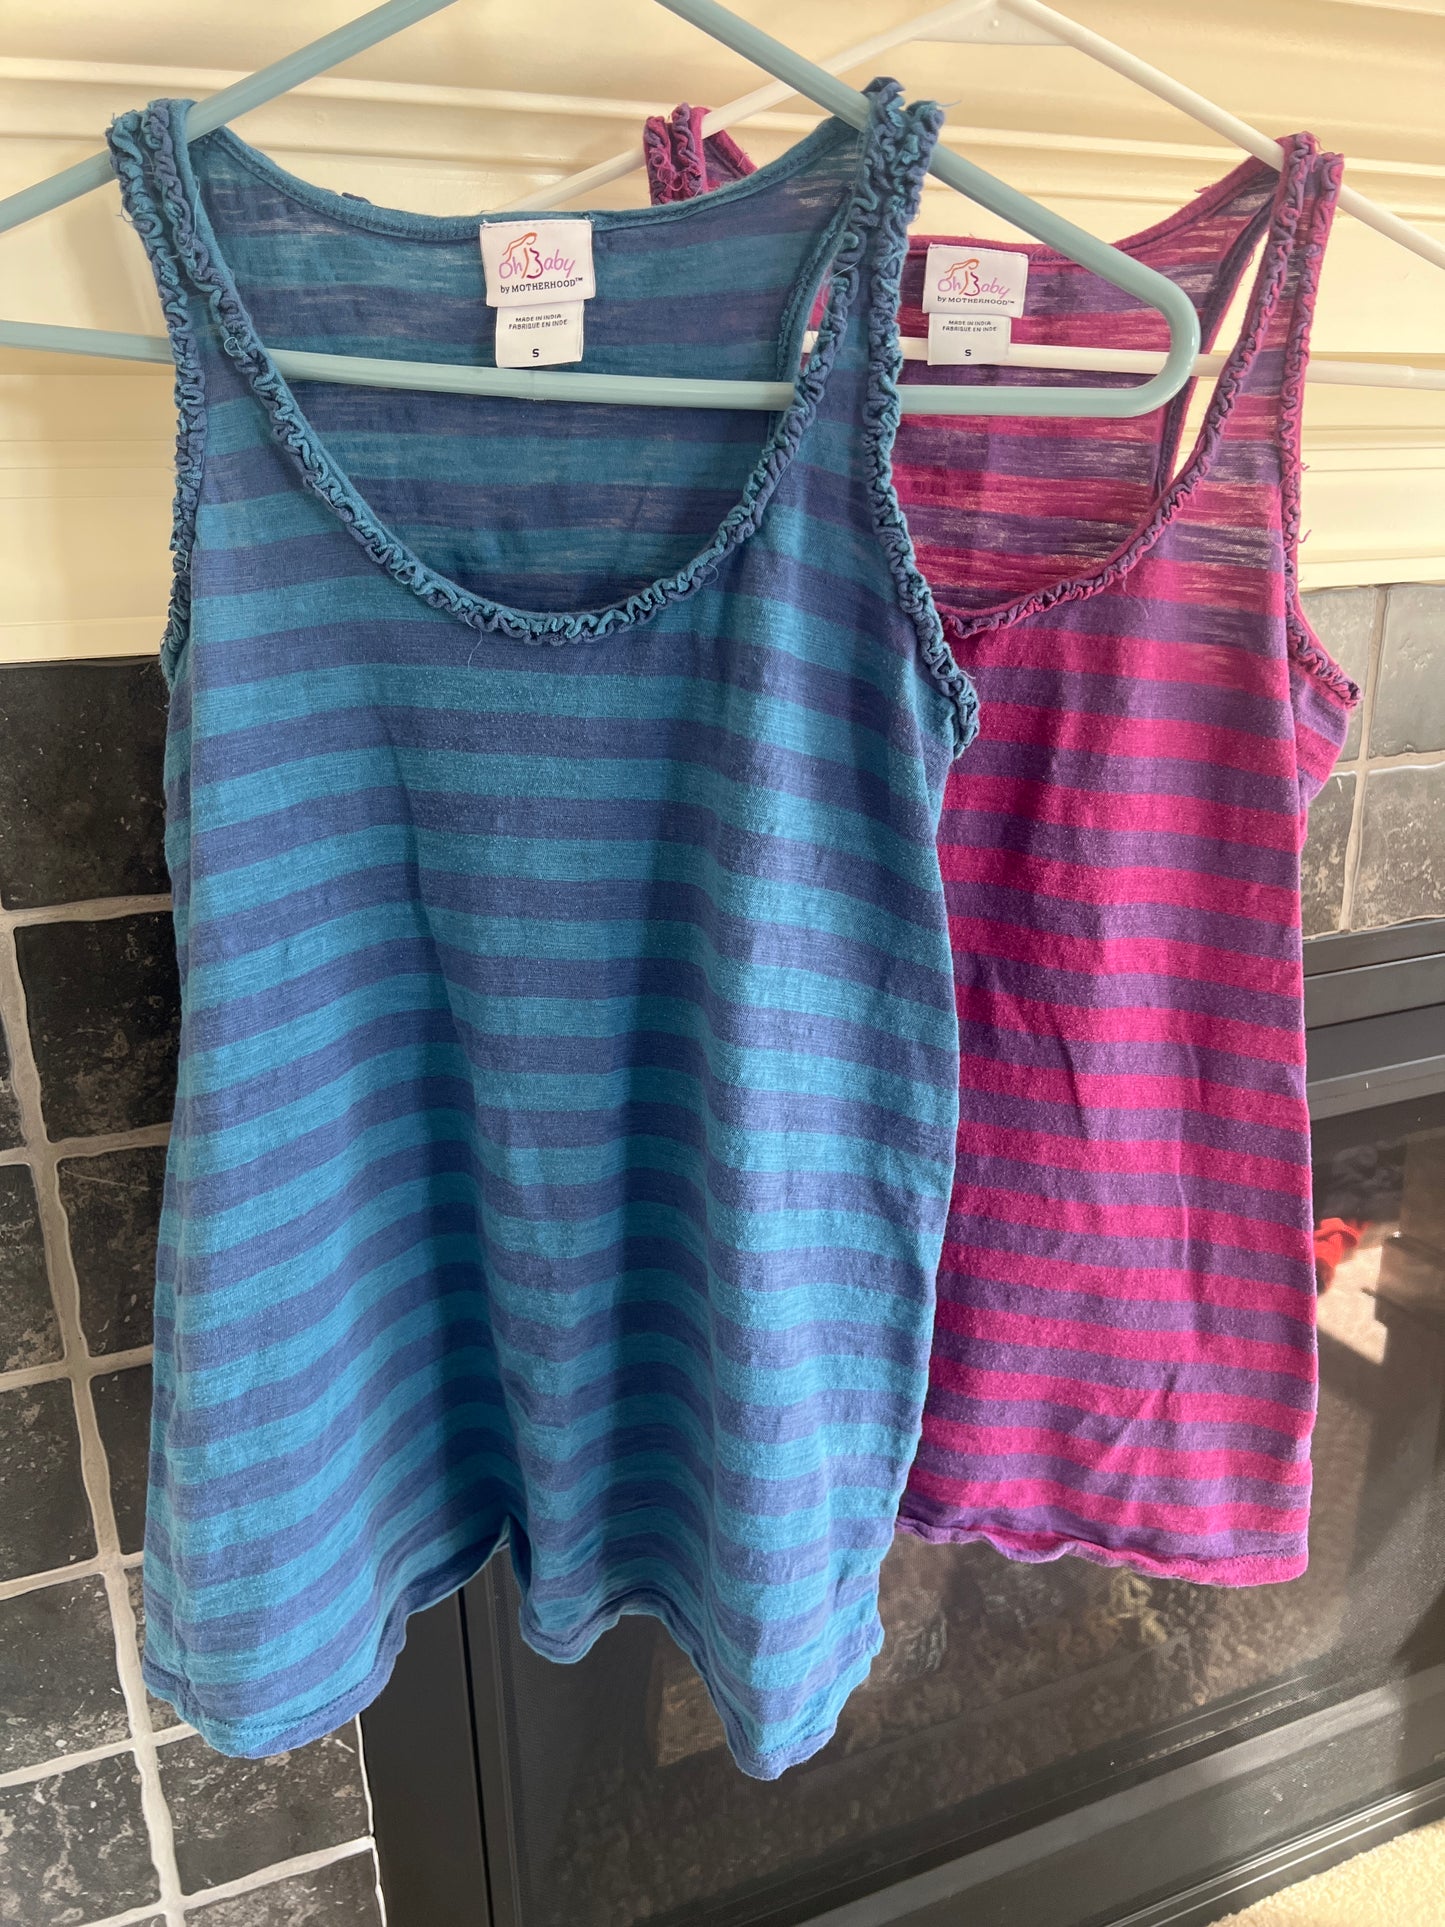 Oh Baby tank tops, size small